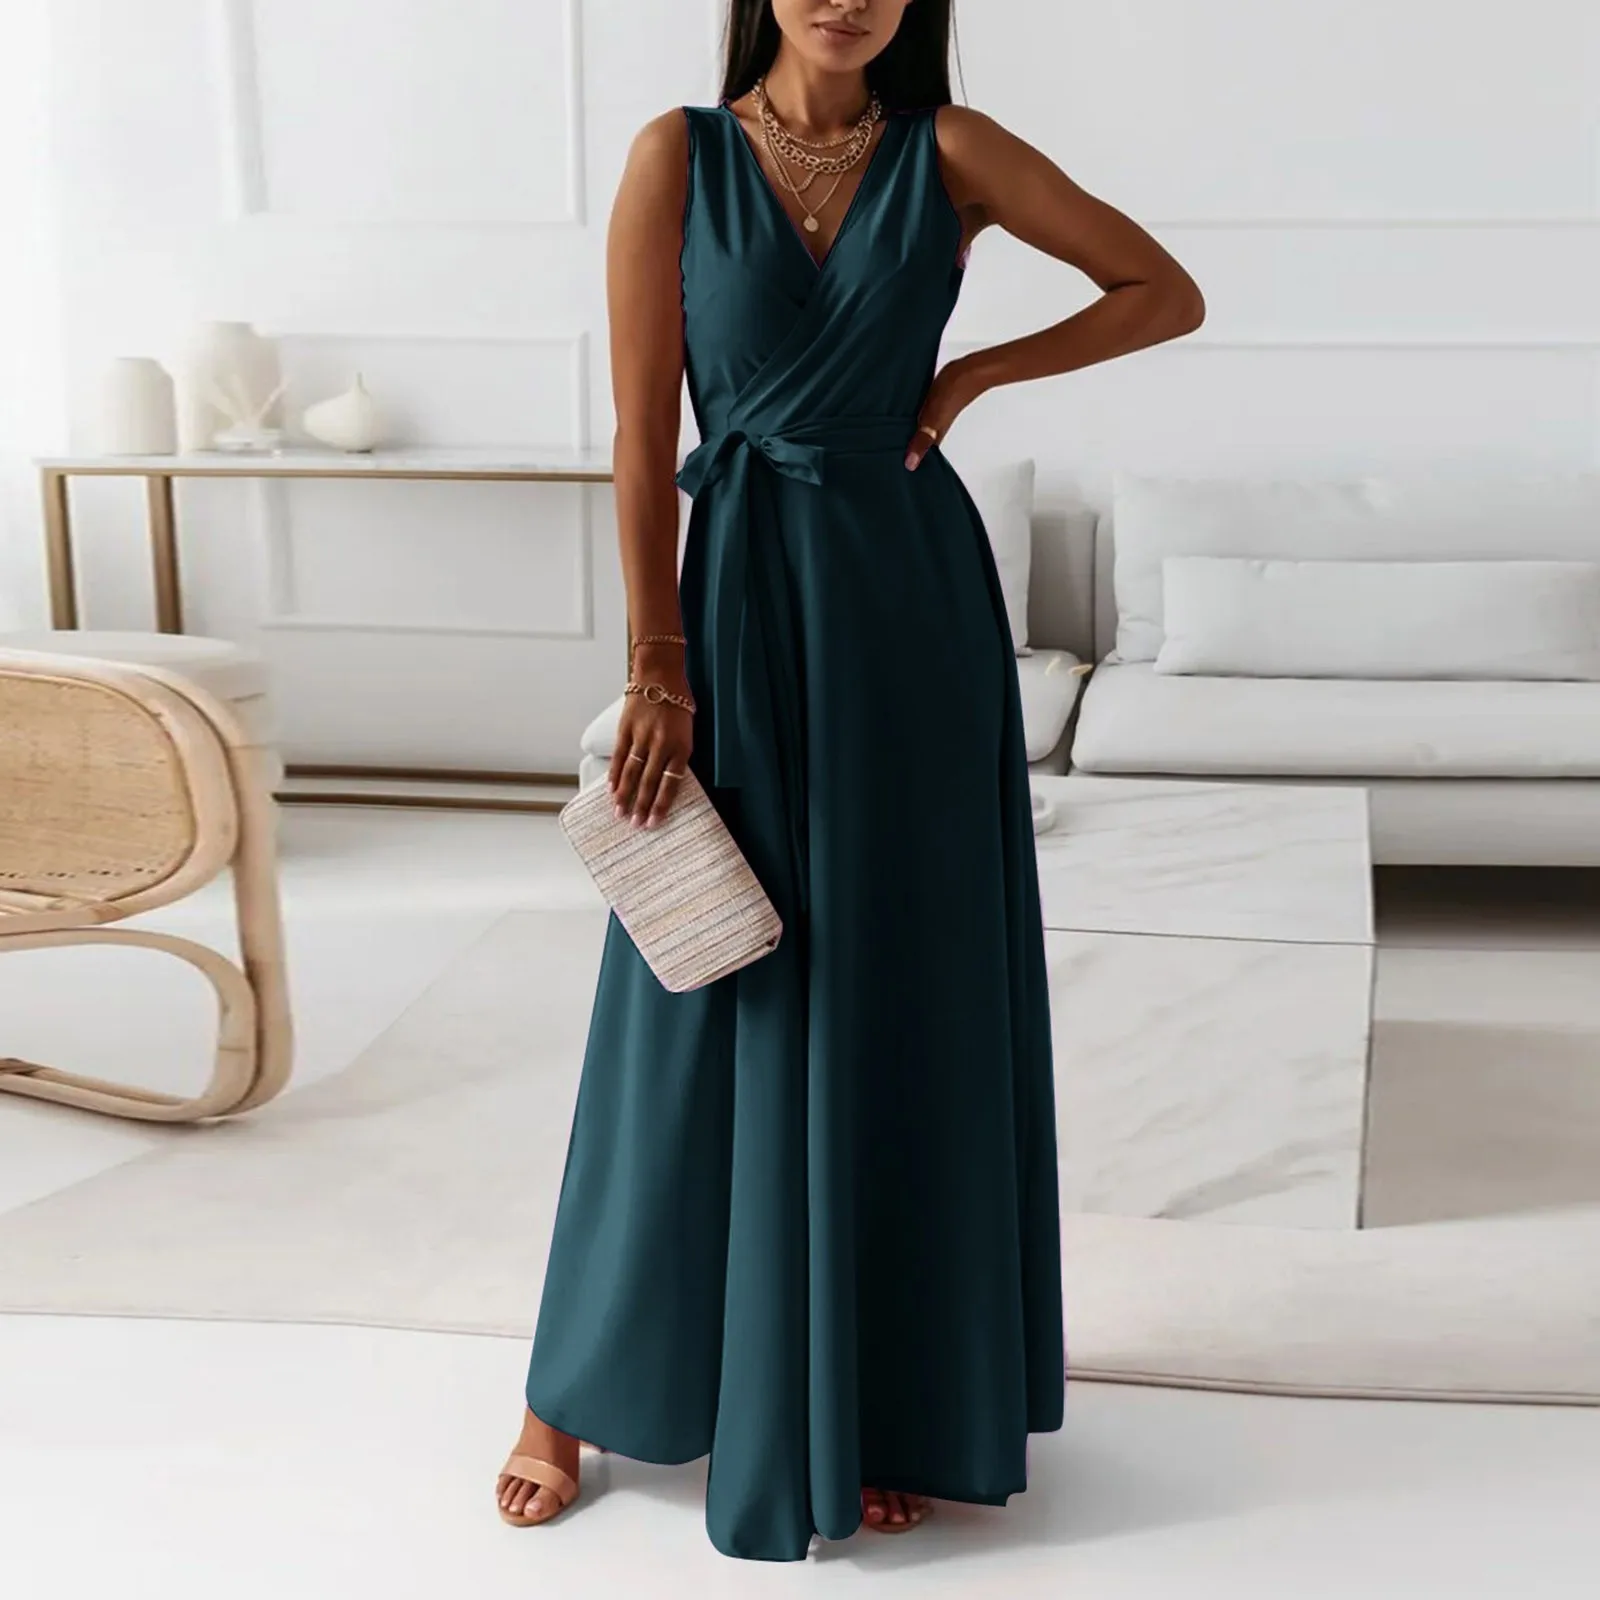 

Elegant Dresses For Women Formal Occasion Dresses Solid V Neck Maxi Dress Cocktail Party Dress Vestidos Casual Outfits платье